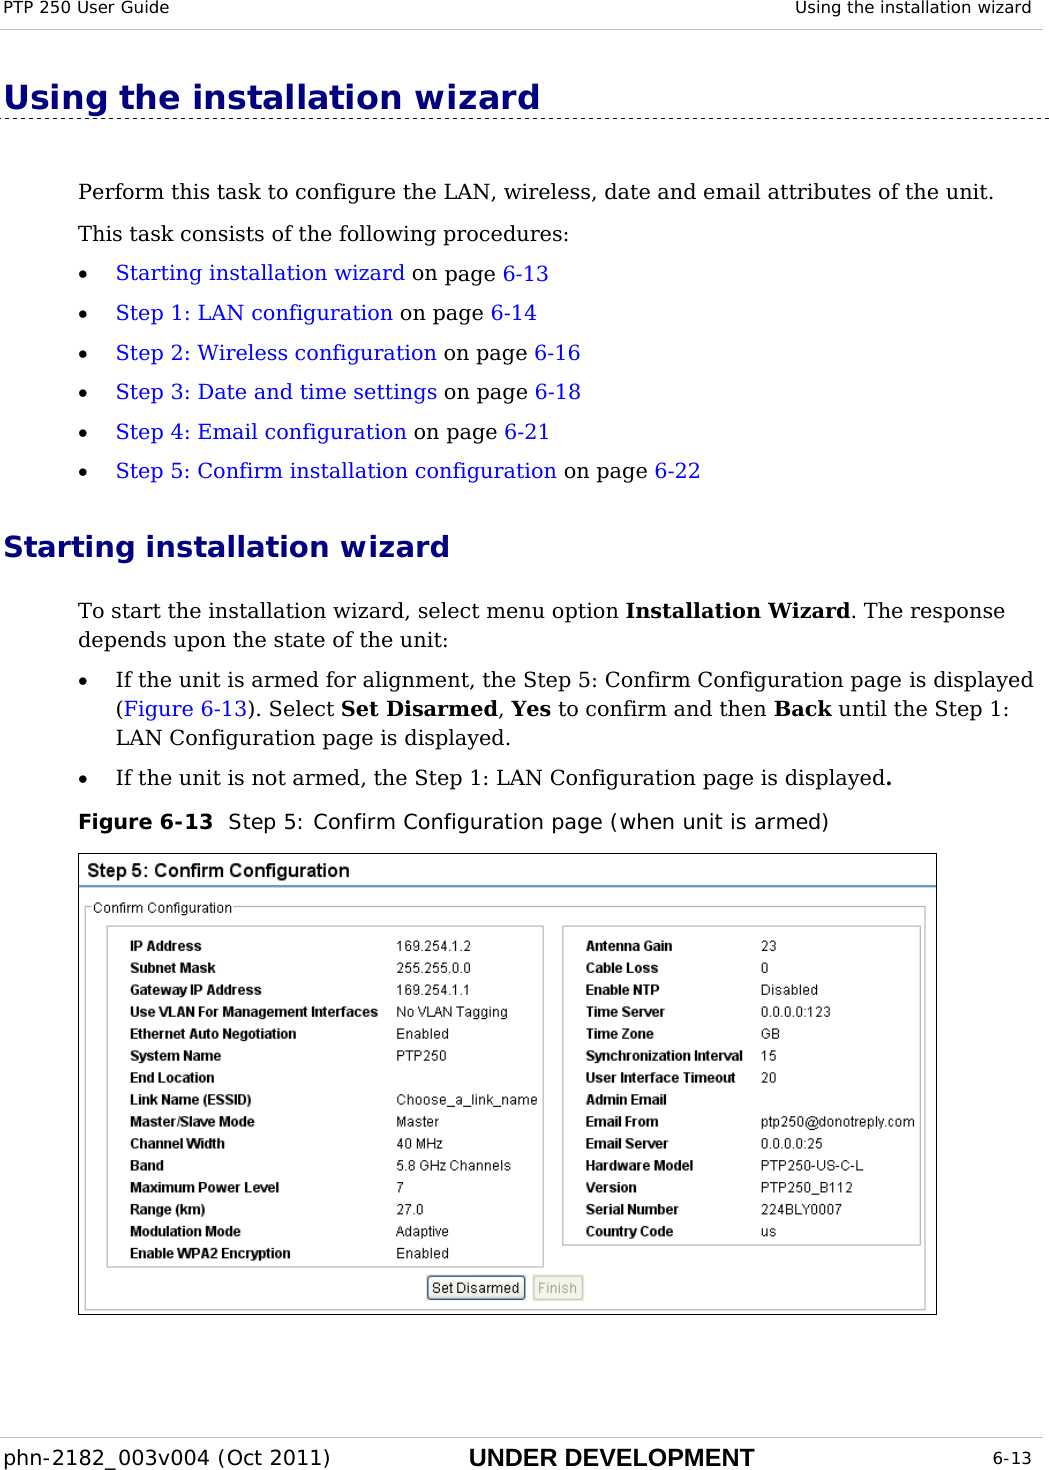 PTP 250 User Guide  Using the installation wizard  phn-2182_003v004 (Oct 2011)  UNDER DEVELOPMENT  6-13  Using the installation wizard Perform this task to configure the LAN, wireless, date and email attributes of the unit. This task consists of the following procedures: • Starting installation wizard on page 6-13 • Step 1: LAN configuration on page 6-14 • Step 2: Wireless configuration on page 6-16 • Step 3: Date and time settings on page 6-18 • Step 4: Email configuration on page 6-21 • Step 5: Confirm installation configuration on page 6-22 Starting installation wizard To start the installation wizard, select menu option Installation Wizard. The response depends upon the state of the unit: • If the unit is armed for alignment, the Step 5: Confirm Configuration page is displayed (Figure 6-13). Select Set Disarmed, Yes to confirm and then Back until the Step 1: LAN Configuration page is displayed. • If the unit is not armed, the Step 1: LAN Configuration page is displayed. Figure 6-13  Step 5: Confirm Configuration page (when unit is armed)  